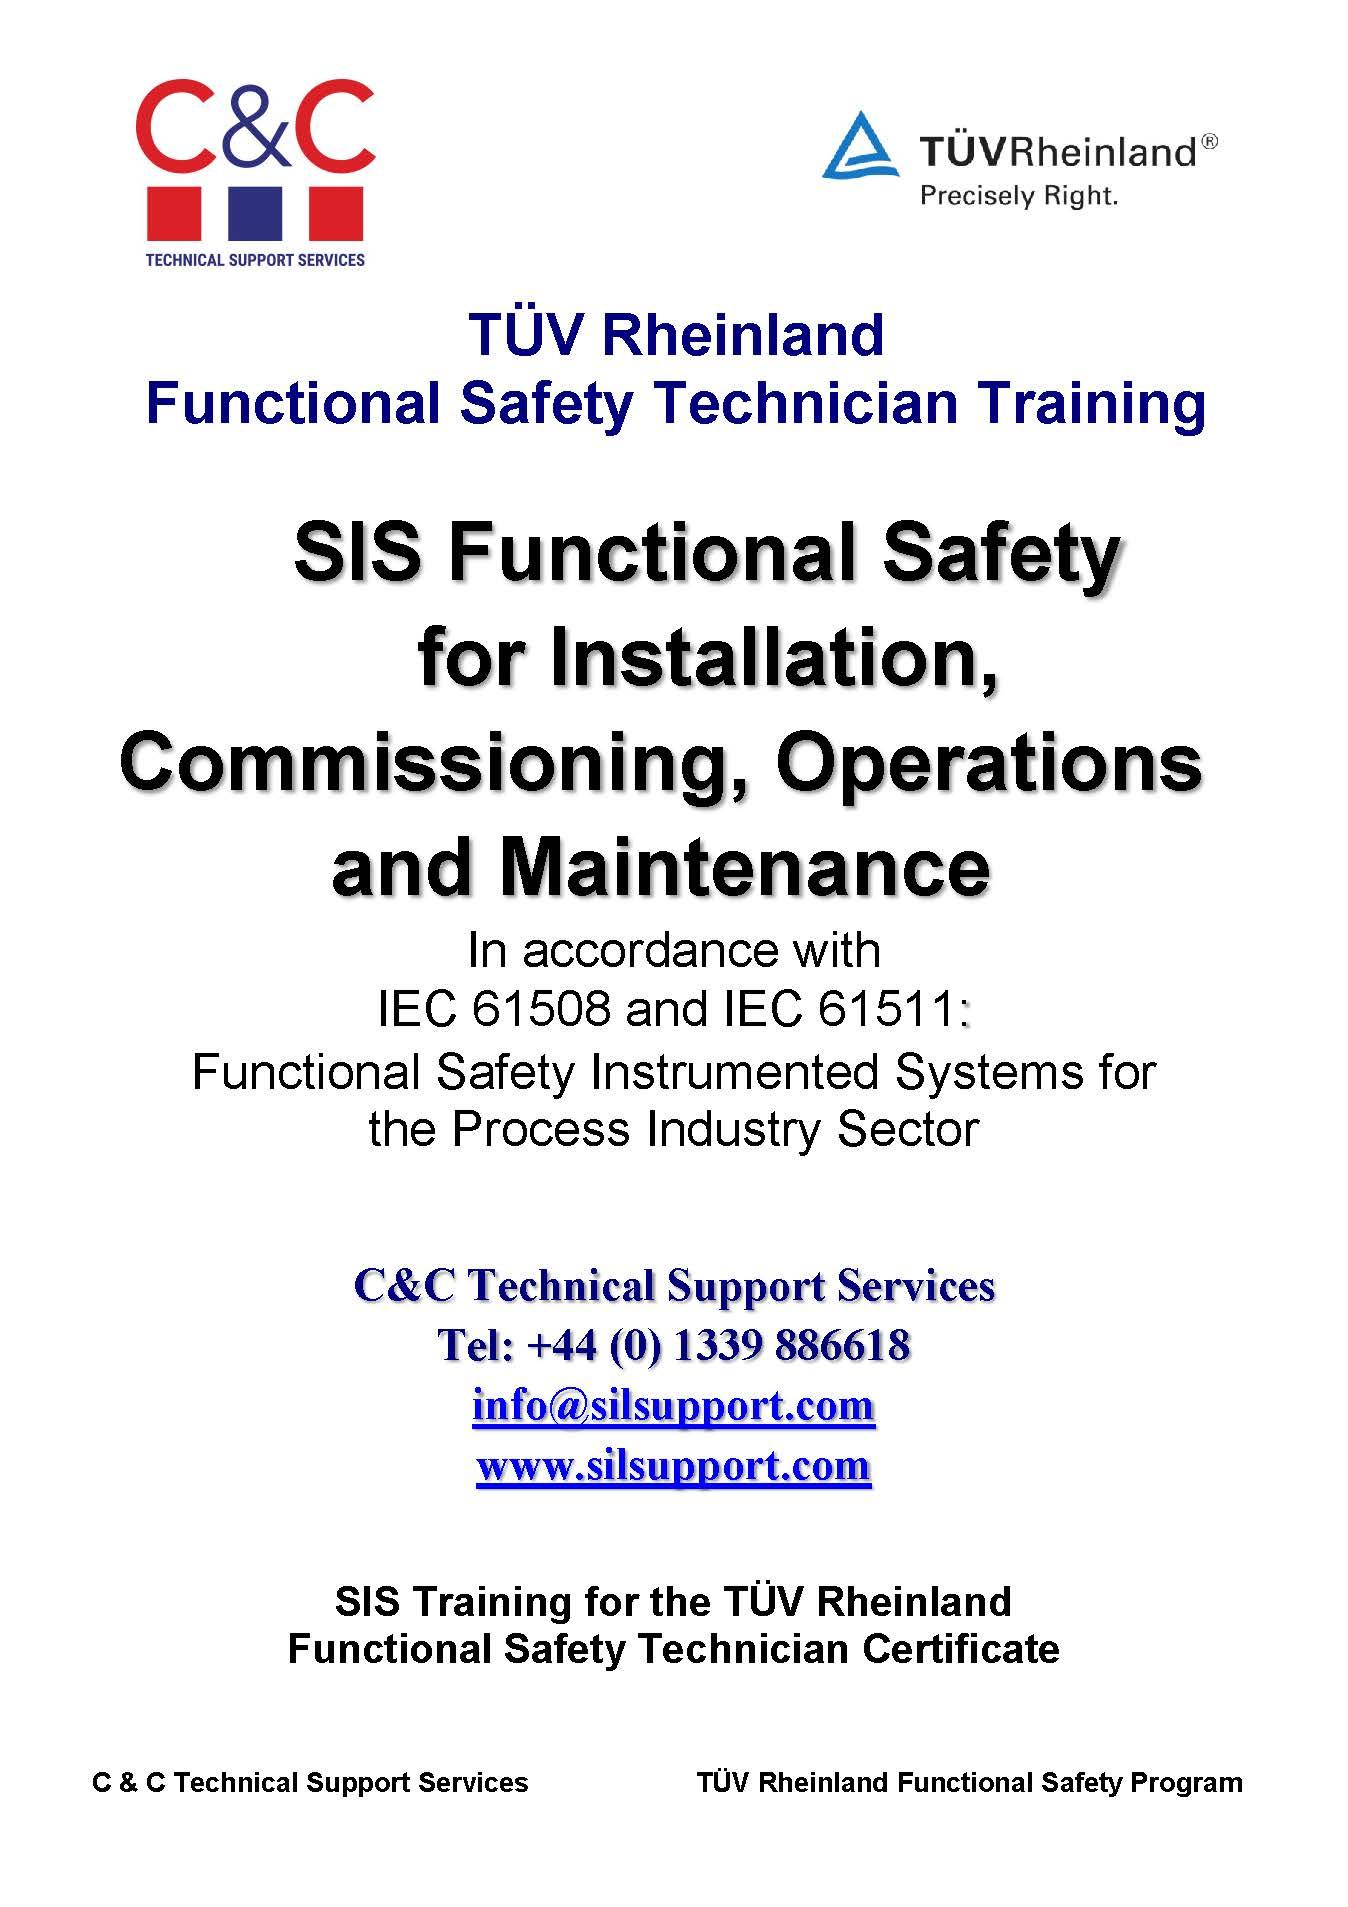 Functional Safety Technician Training